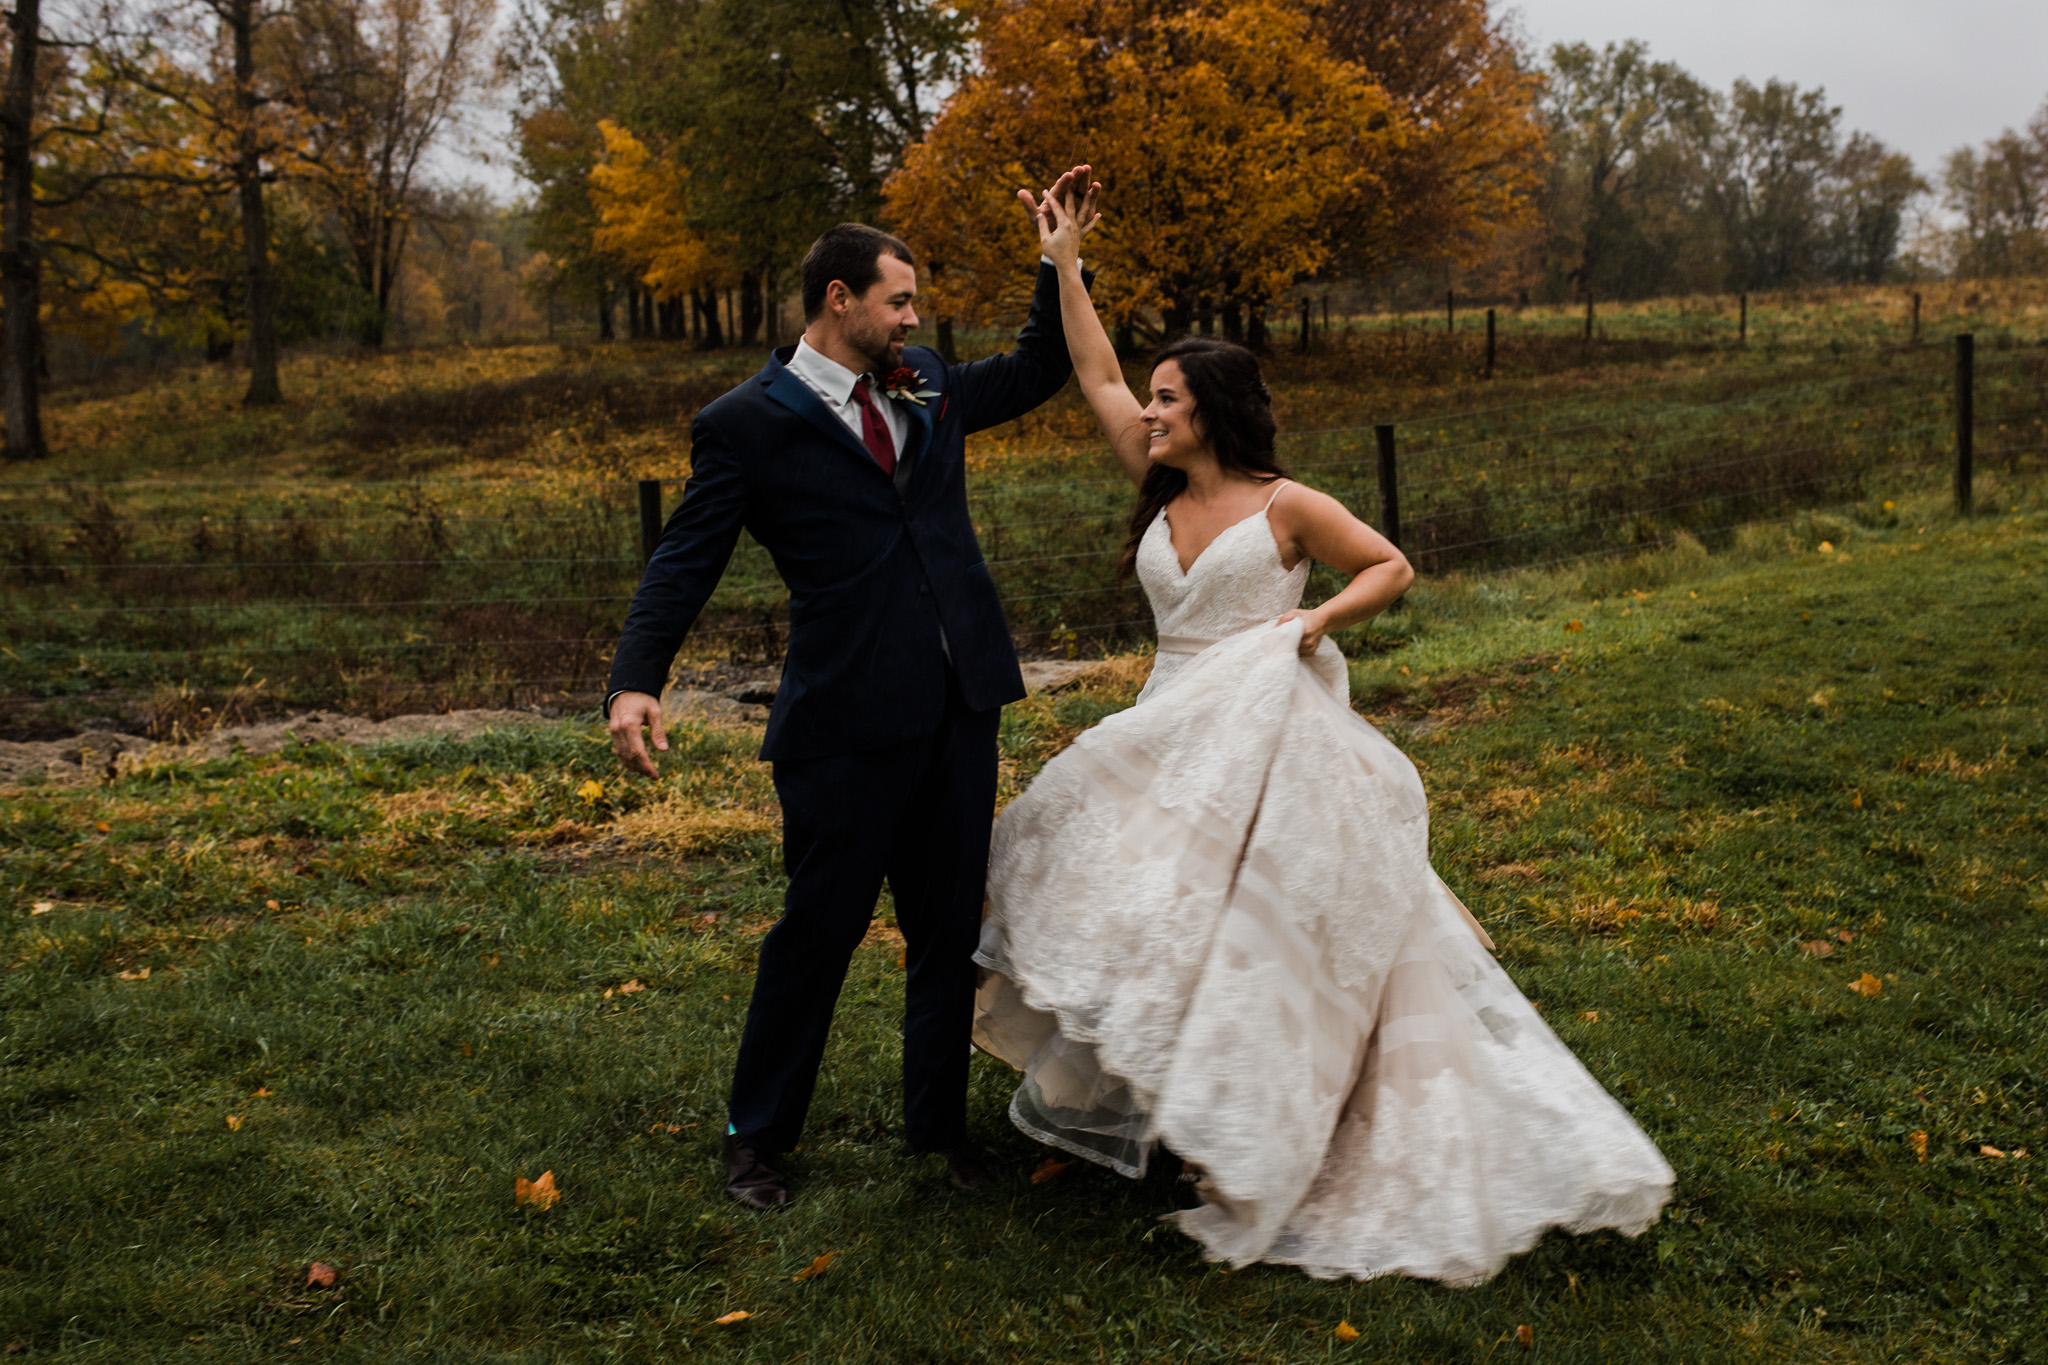 Bride and groom dancing in the autumn rain at their bison ranch wedding.